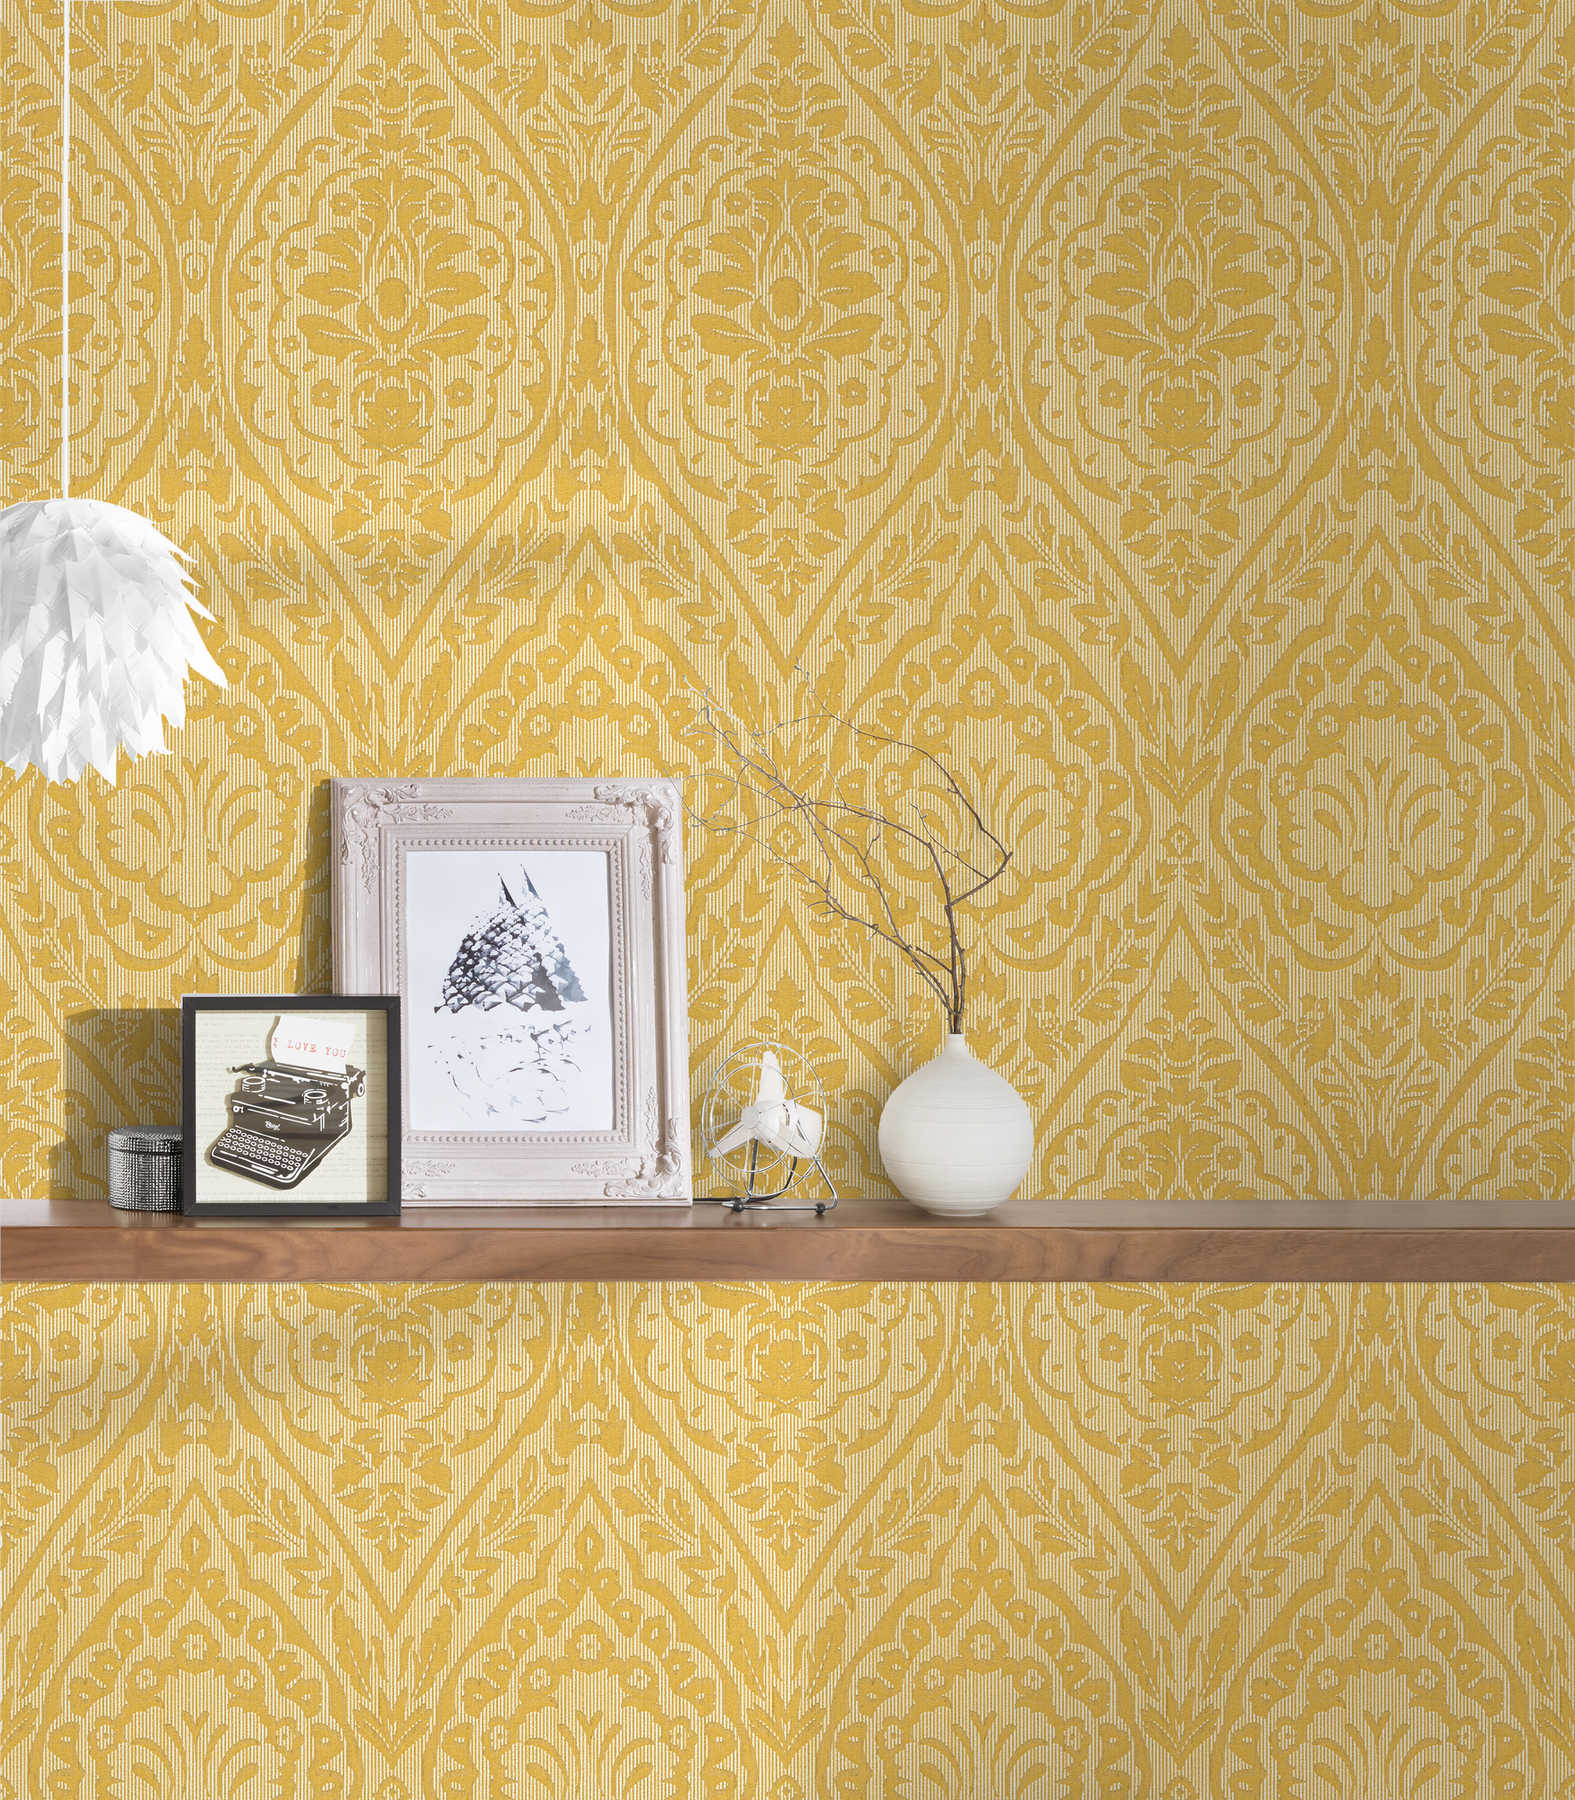             Non-woven wallpaper with structure design & ornamental pattern - yellow
        